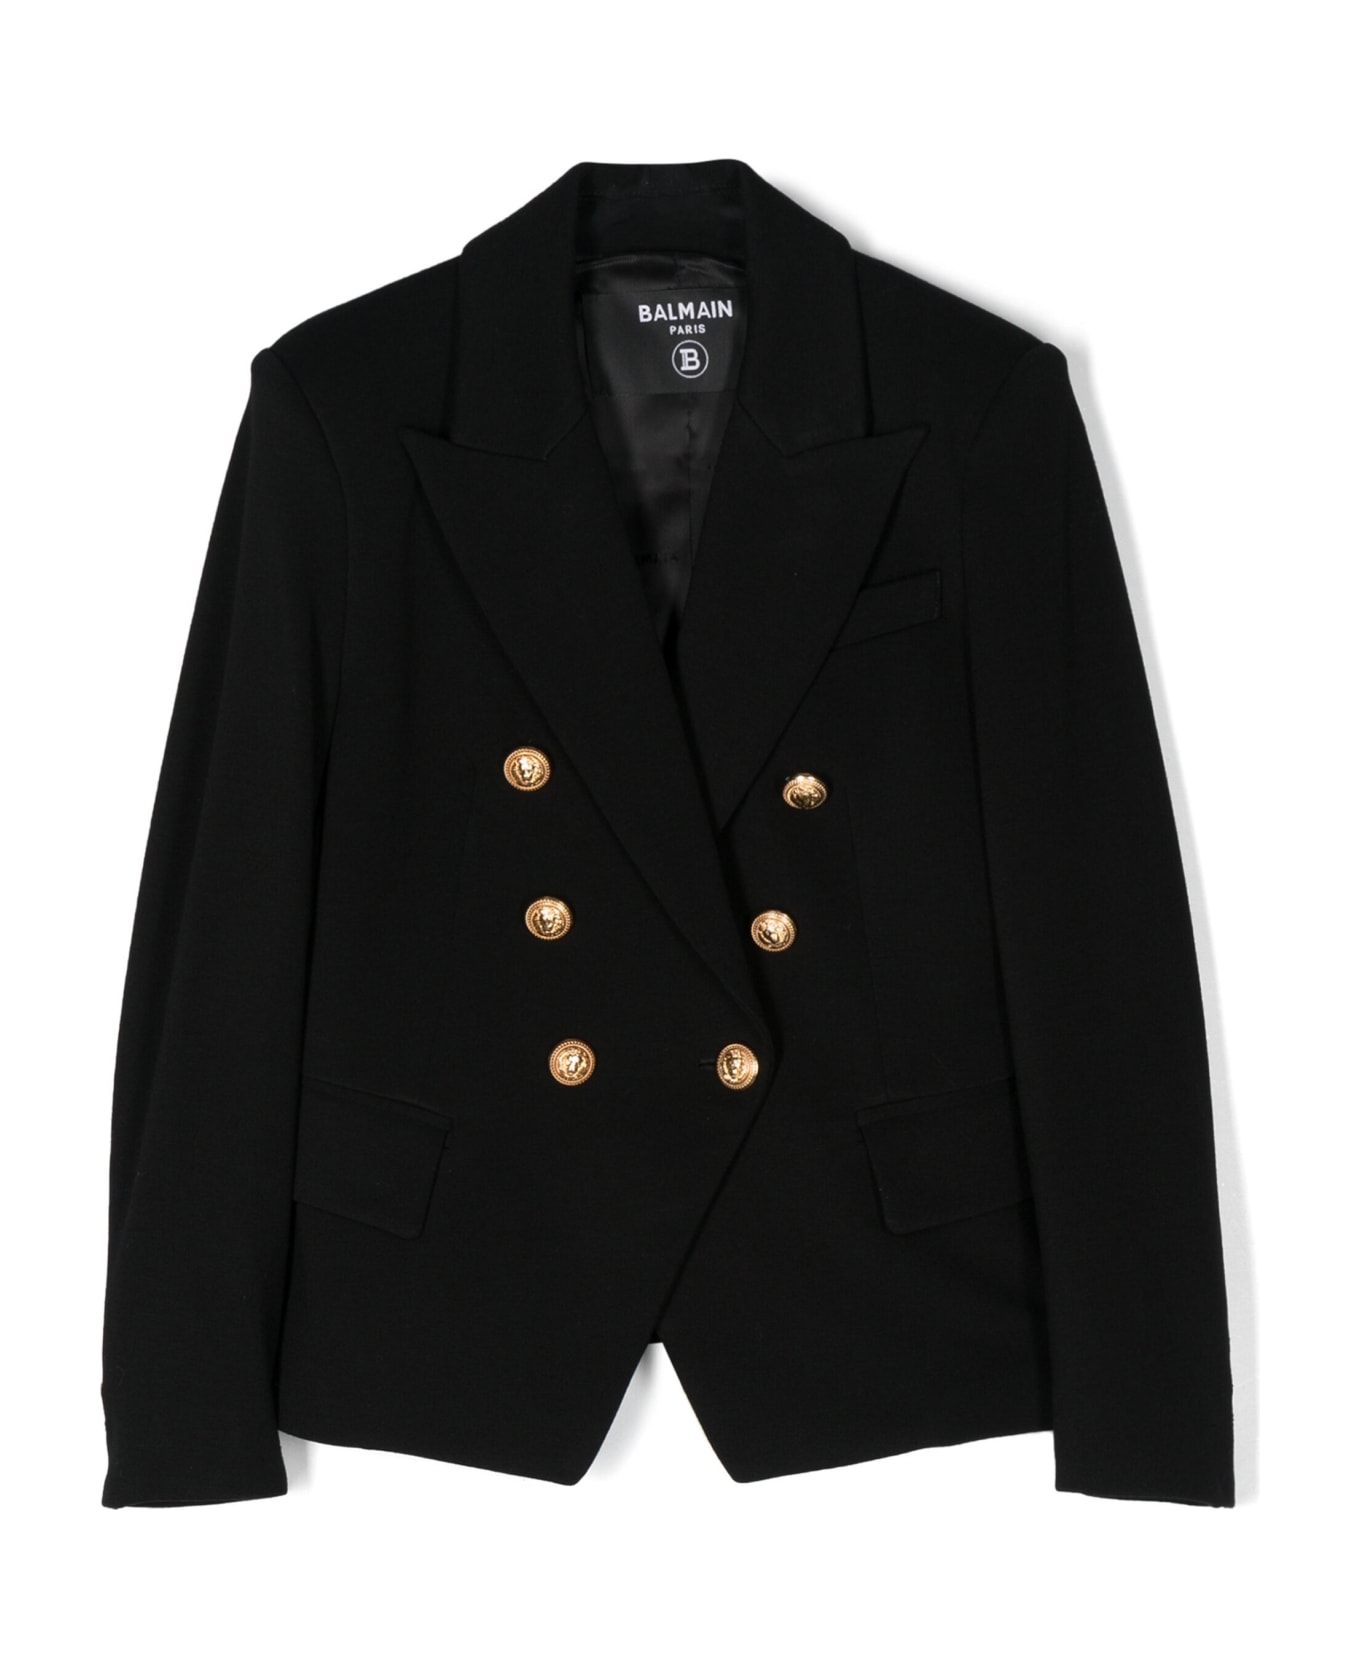 Balmain Black Double-breasted Blazer With Gold Buttons - Black